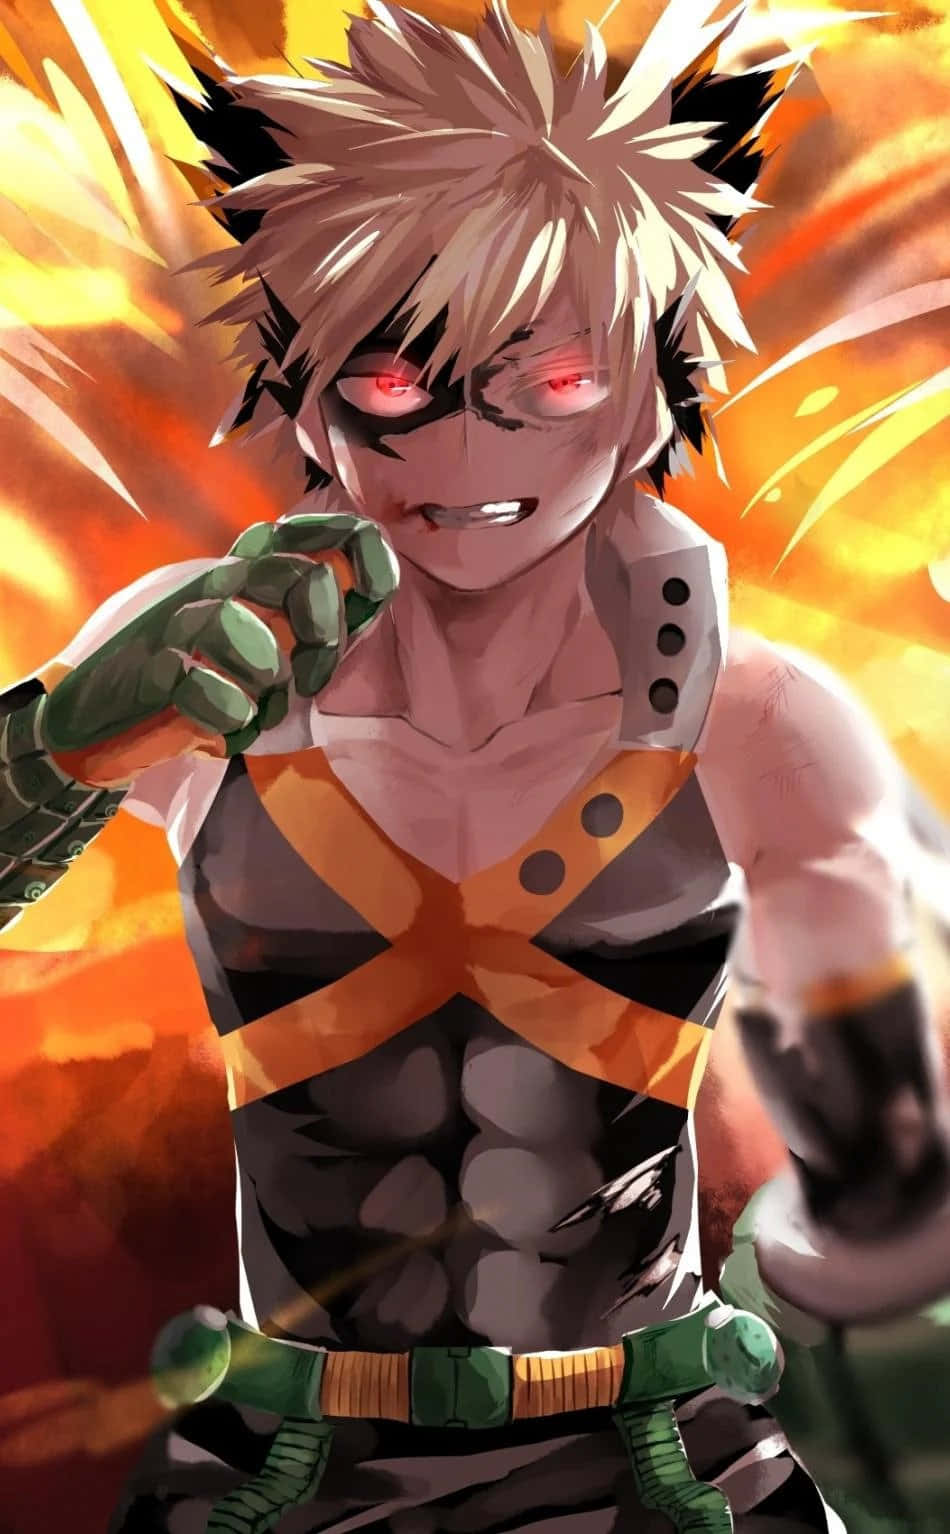 "Sparking a Rage: Bakugou Unleashes the Power of His Quirk"